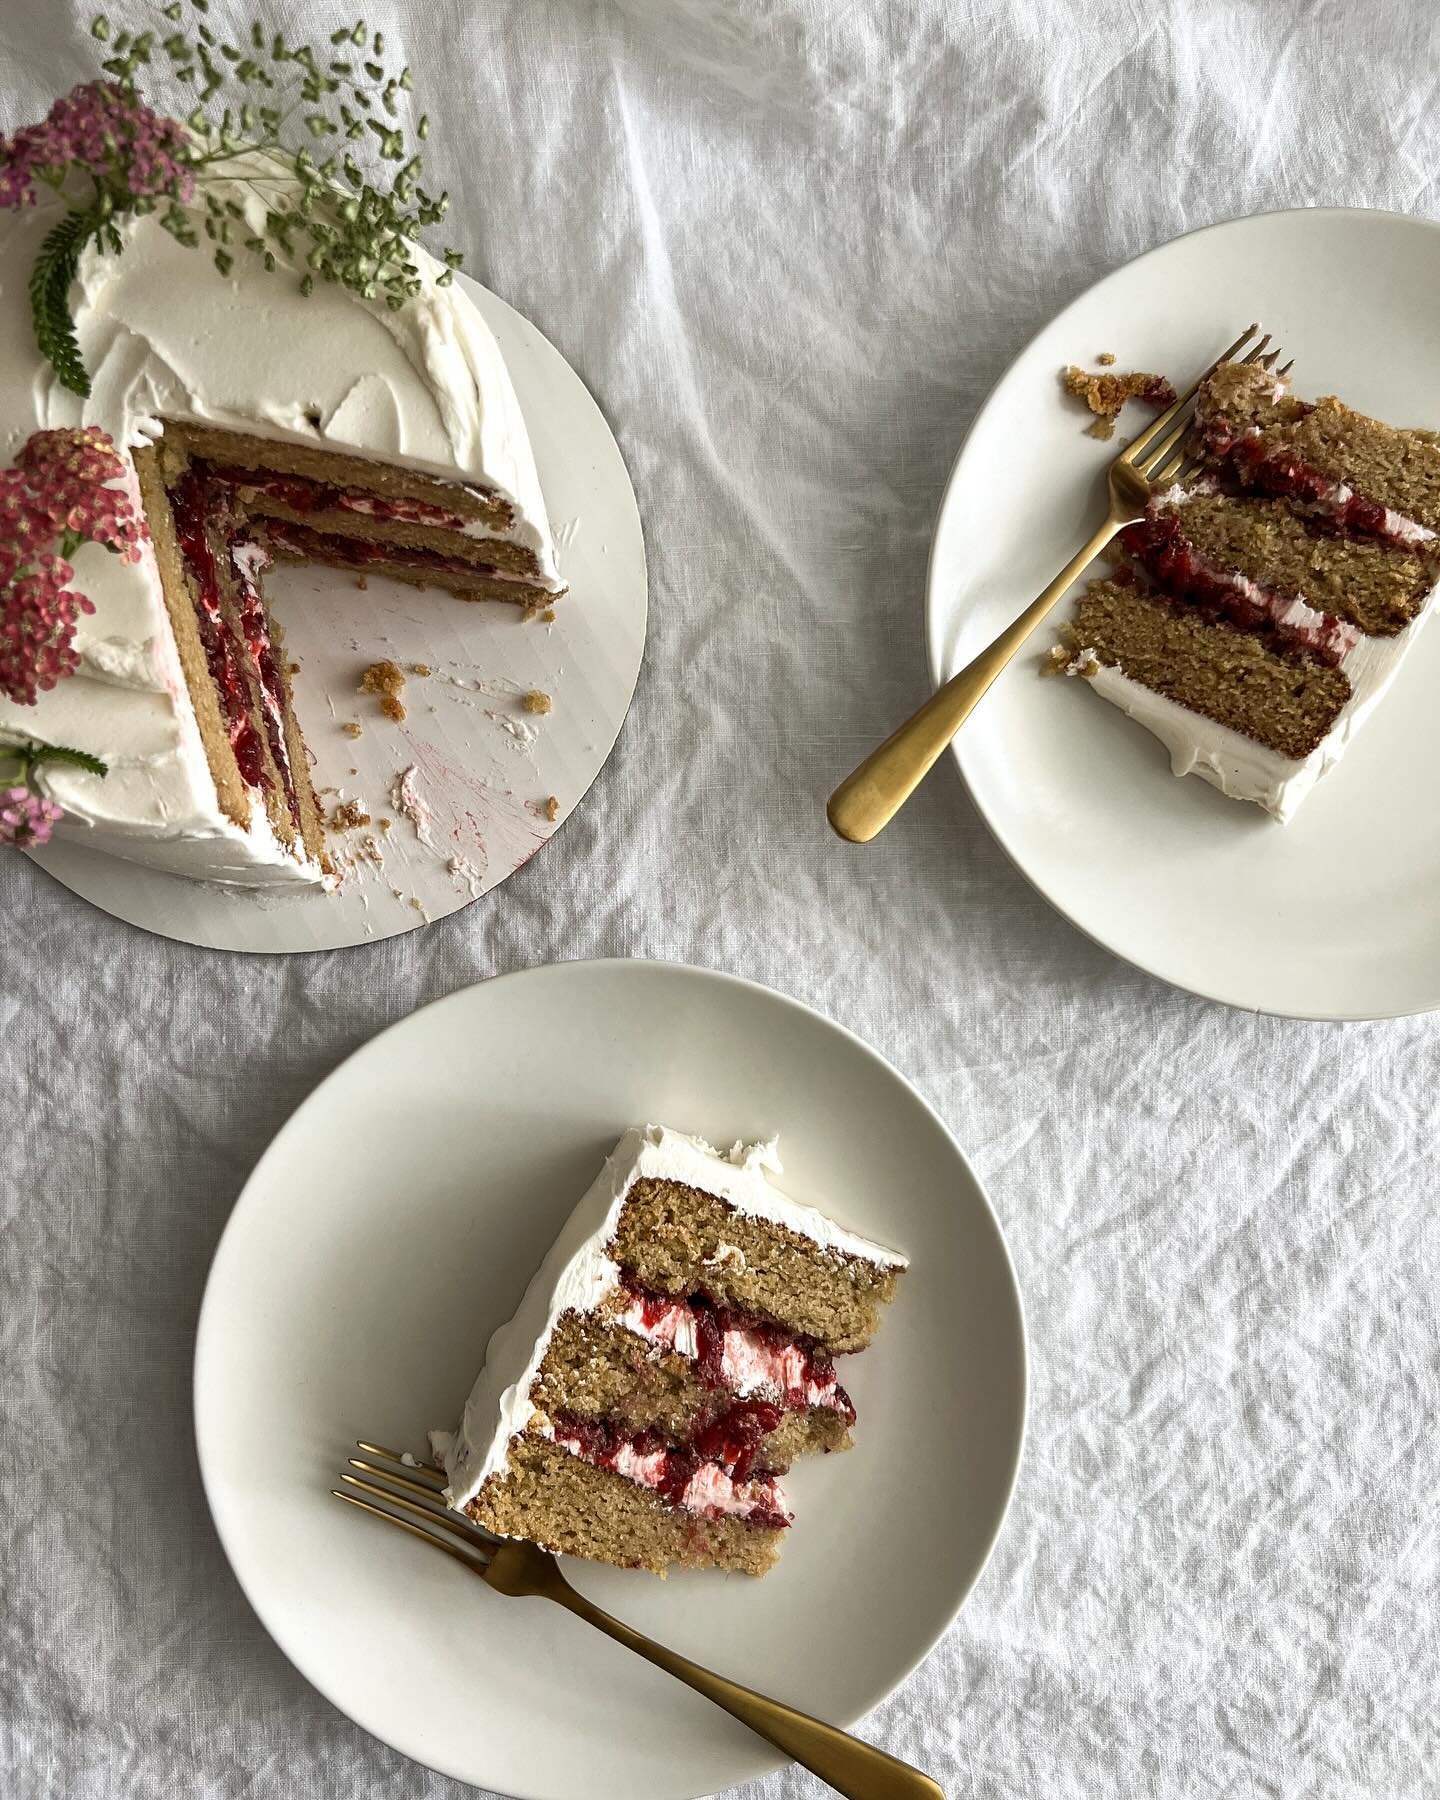 Already dreaming about summer strawberry cakes... Almond avocado oil cake, balsamic strawberry jam, vanilla buttercream. Naturally, gluten, dairy &amp; refined sugar-free. @plantecakes 

And continuing my yarrow obsession. Not only are yarrow so deli